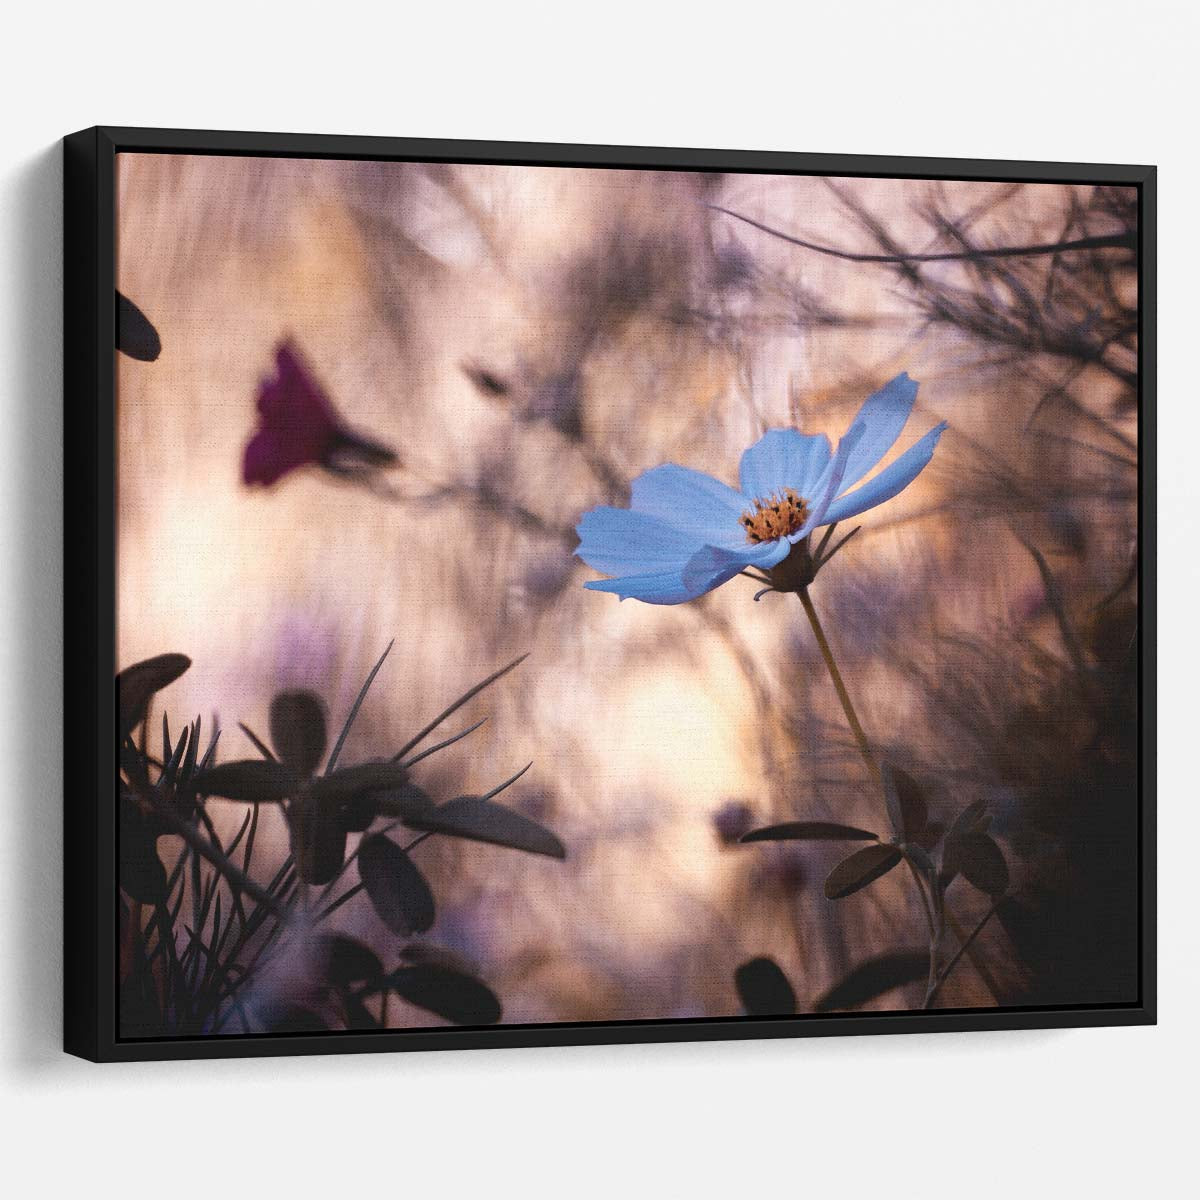 Stunning Macro Blue Cosmos Floral Garden Wall Art by Luxuriance Designs. Made in USA.